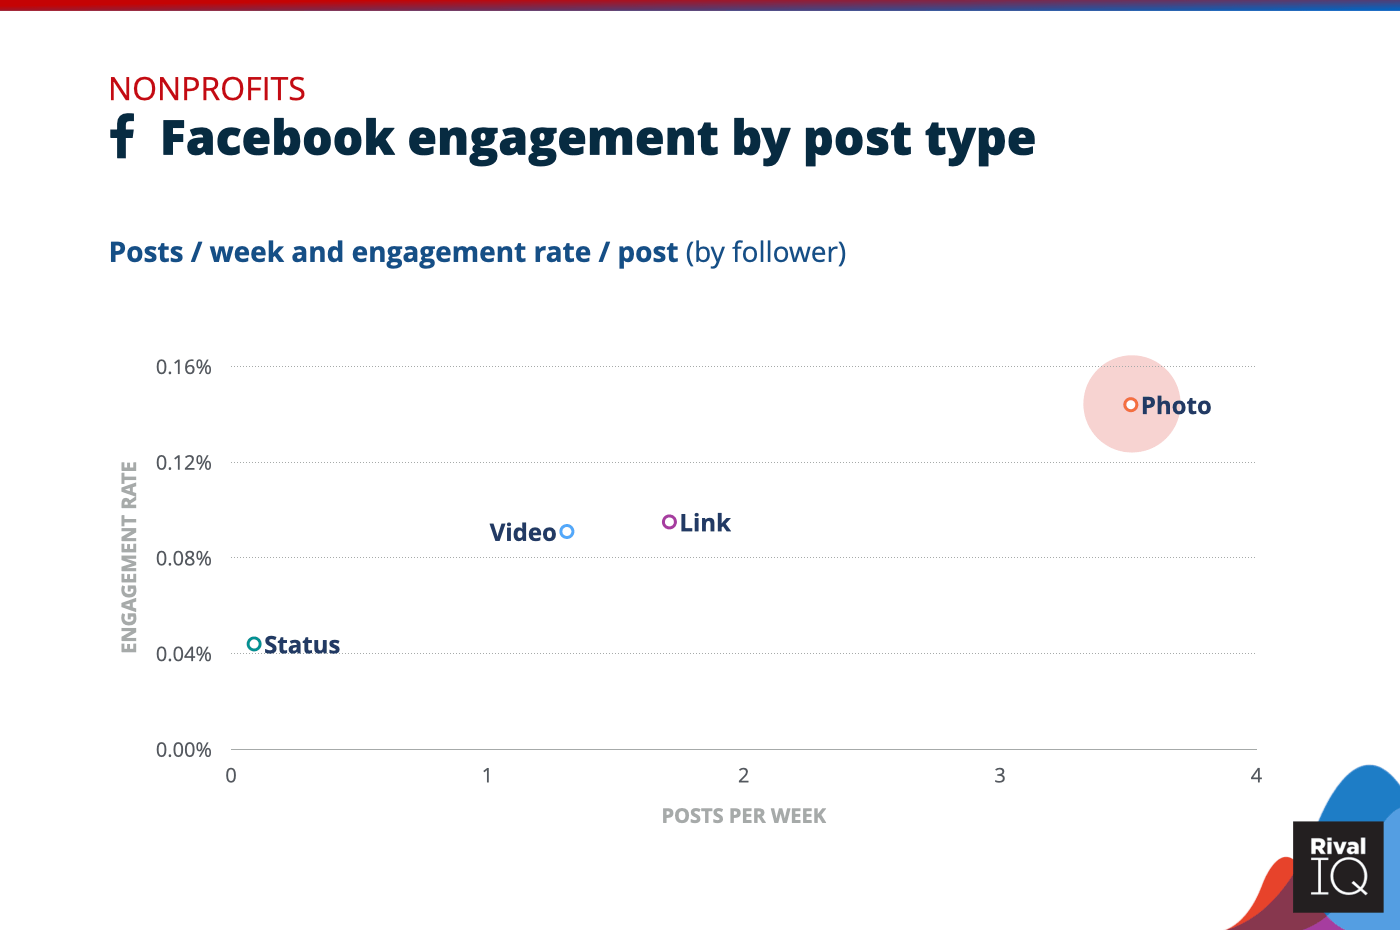 Chart of Facebook posts per week and engagement rate by post type, Nonprofit